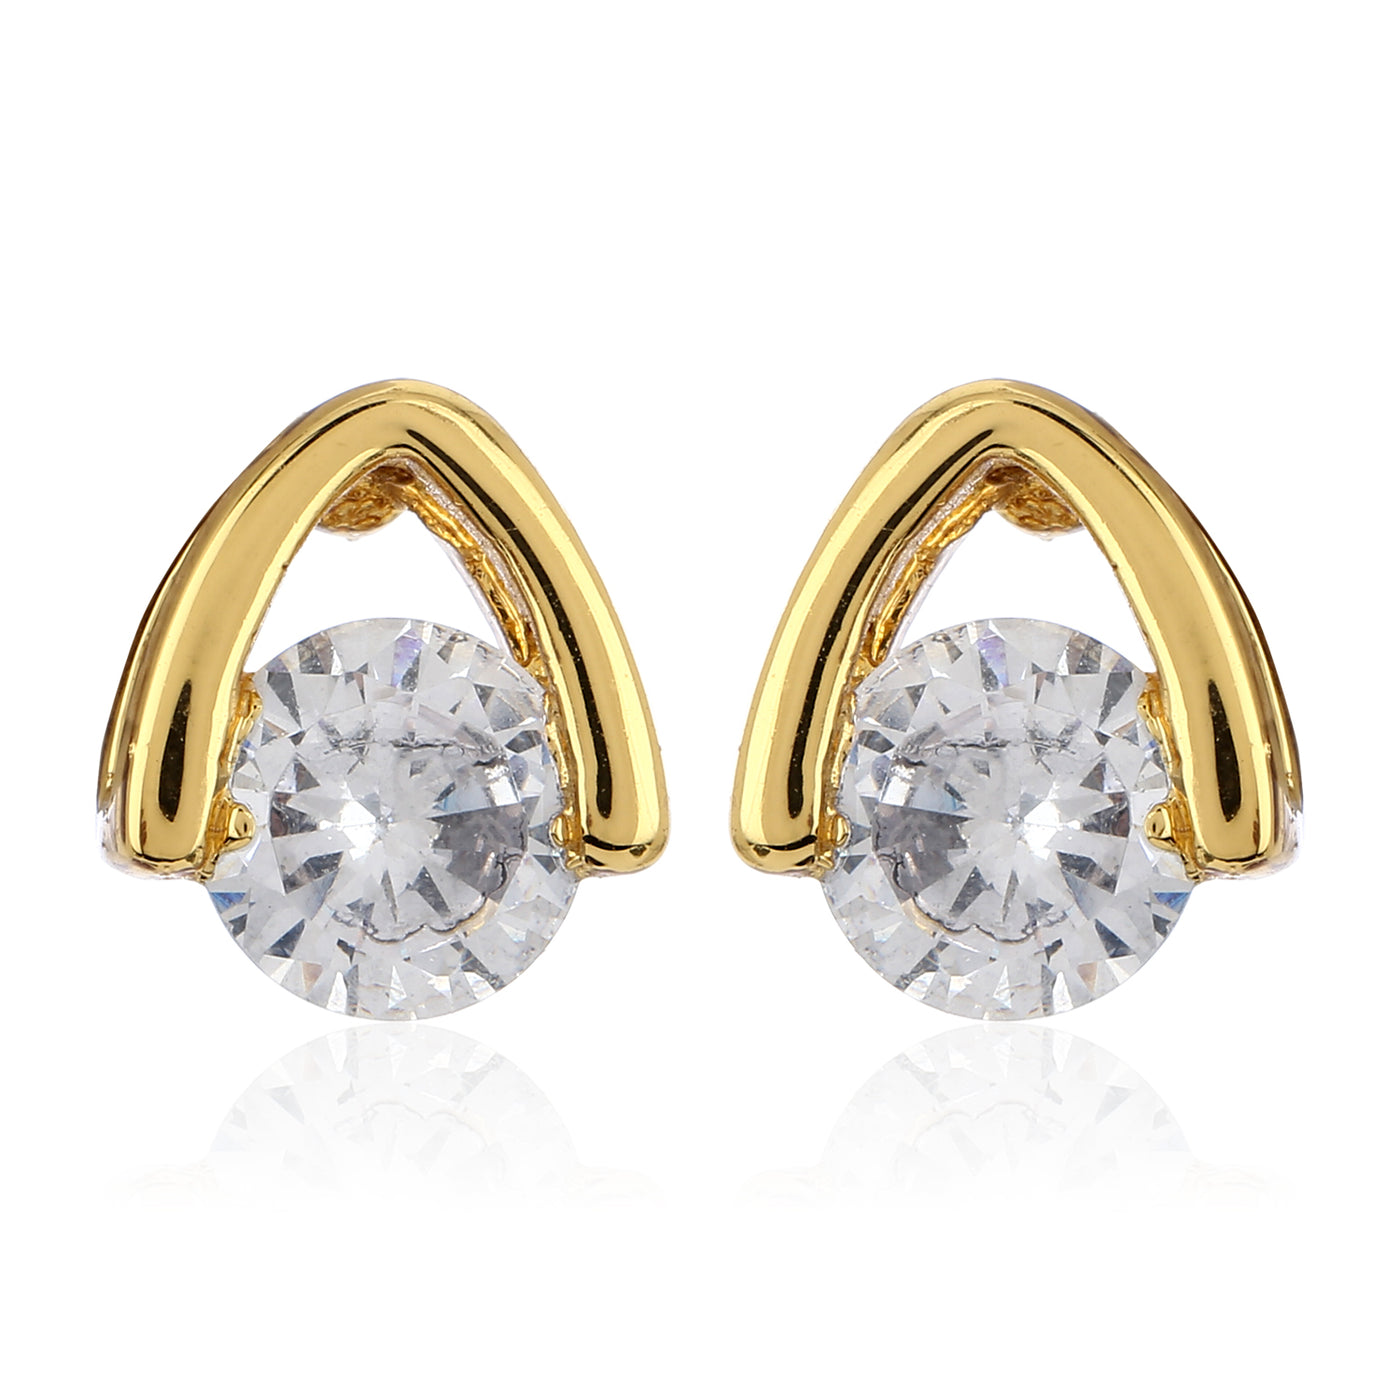 Gold Tone Plated Small Stud Earrings